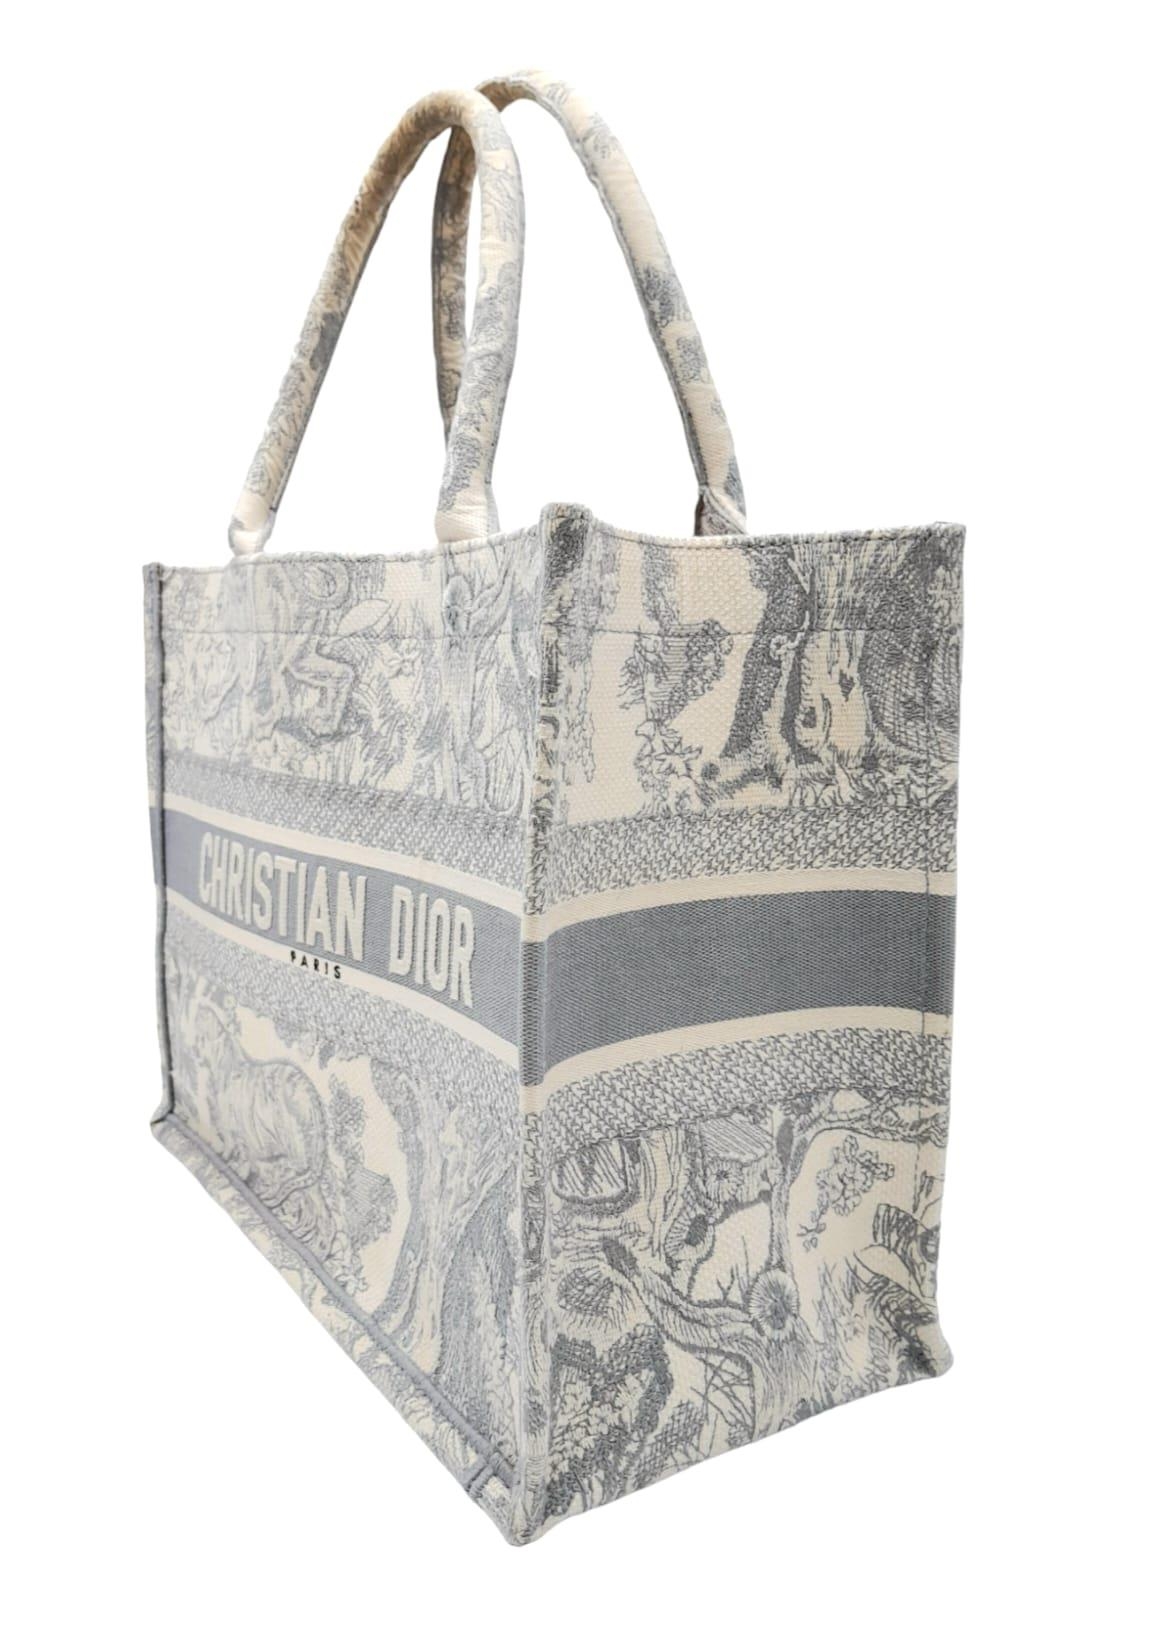 A Christian Dior small toile de jouy book tote bag, grey/white embroidery, top handles. Size approx. - Image 2 of 7